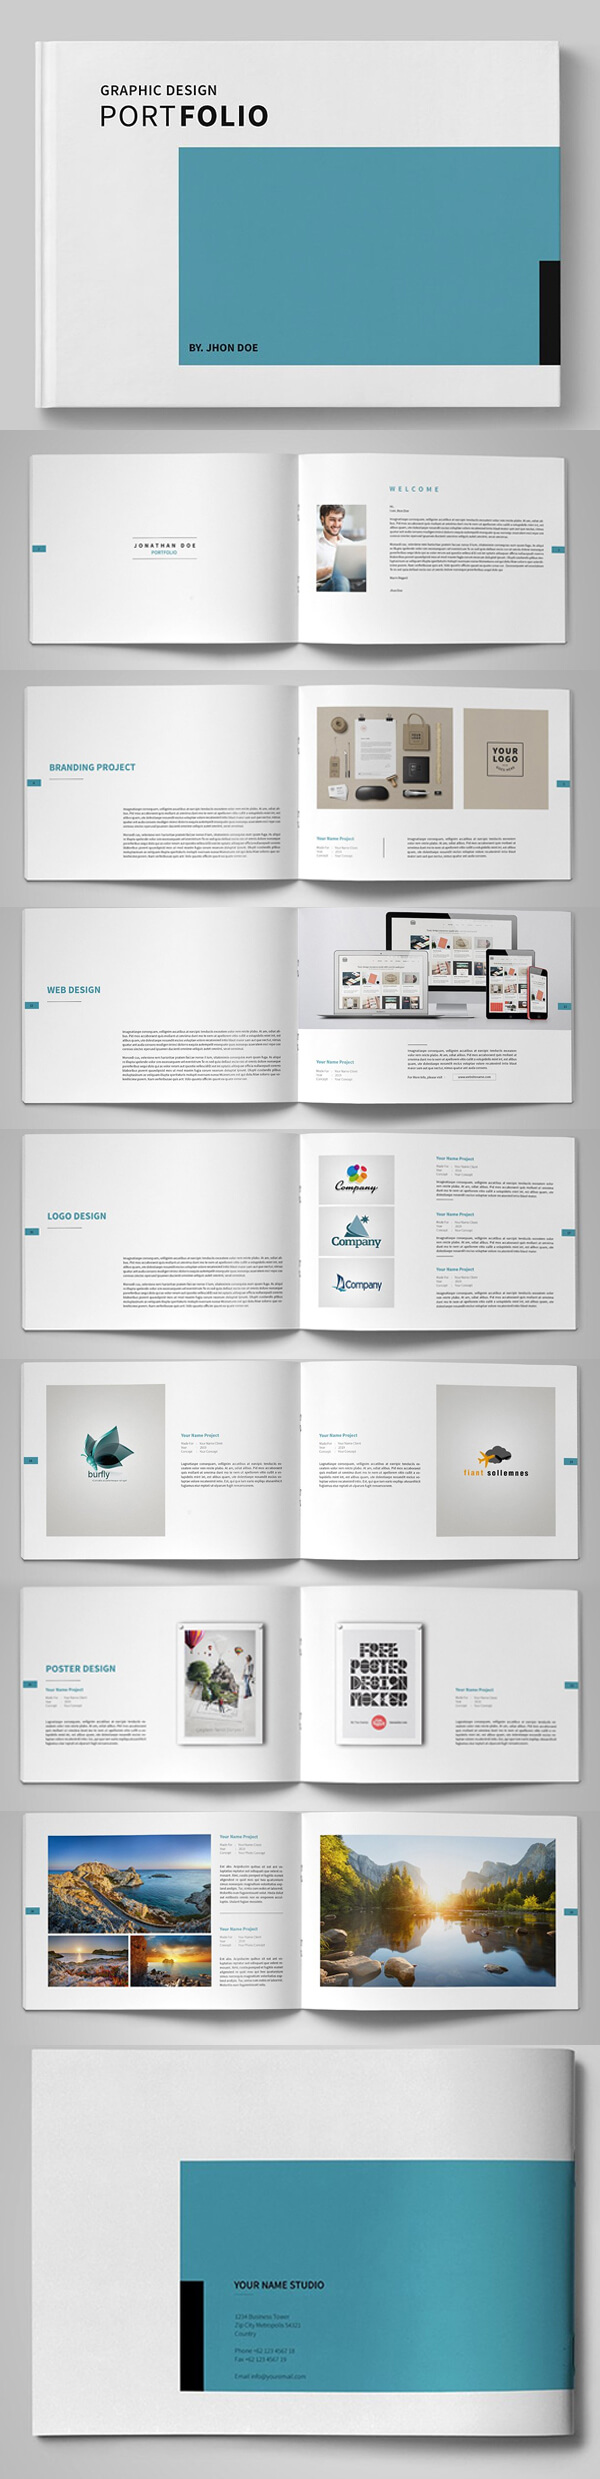 20 New Professional Catalog Brochure Templates | Design Intended For Product Brochure Template Free